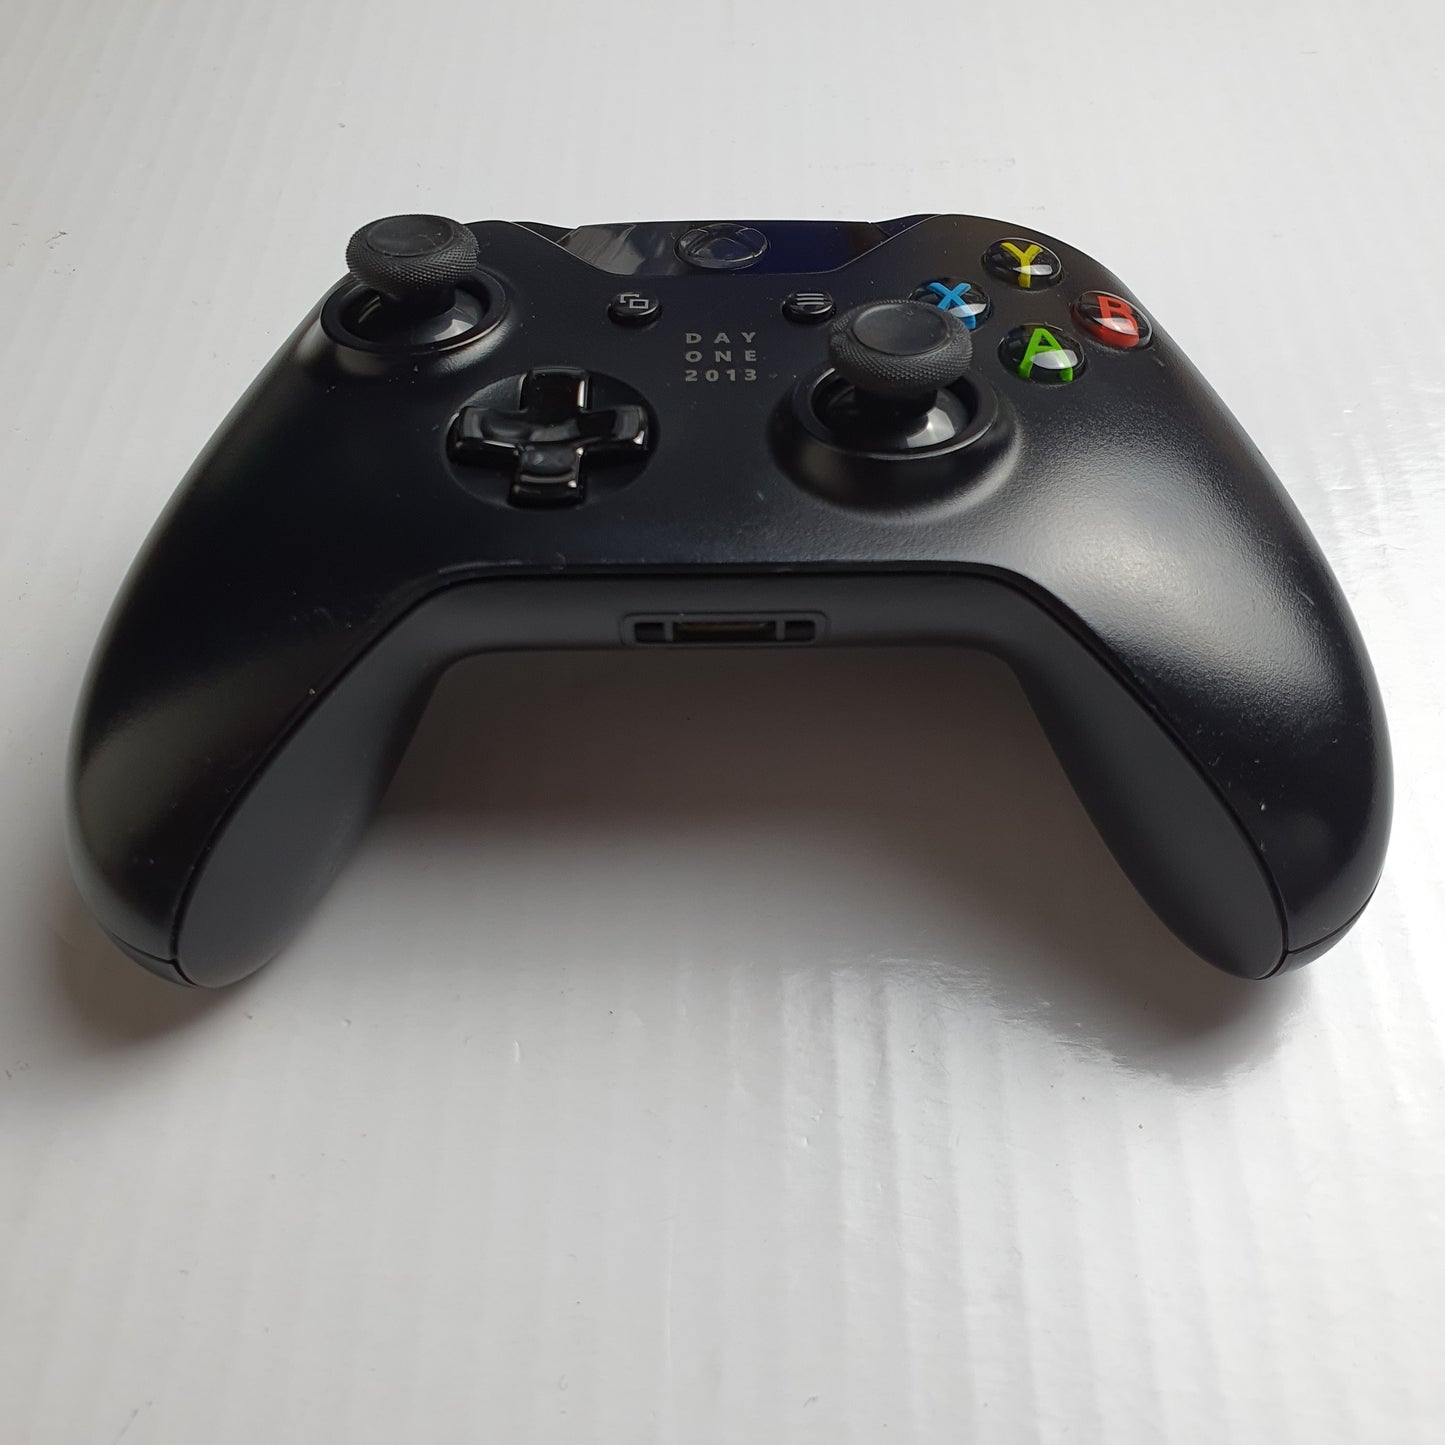 Official Microsoft Xbox One 'Day One 2013' Edition Black Wireless Controller 1537